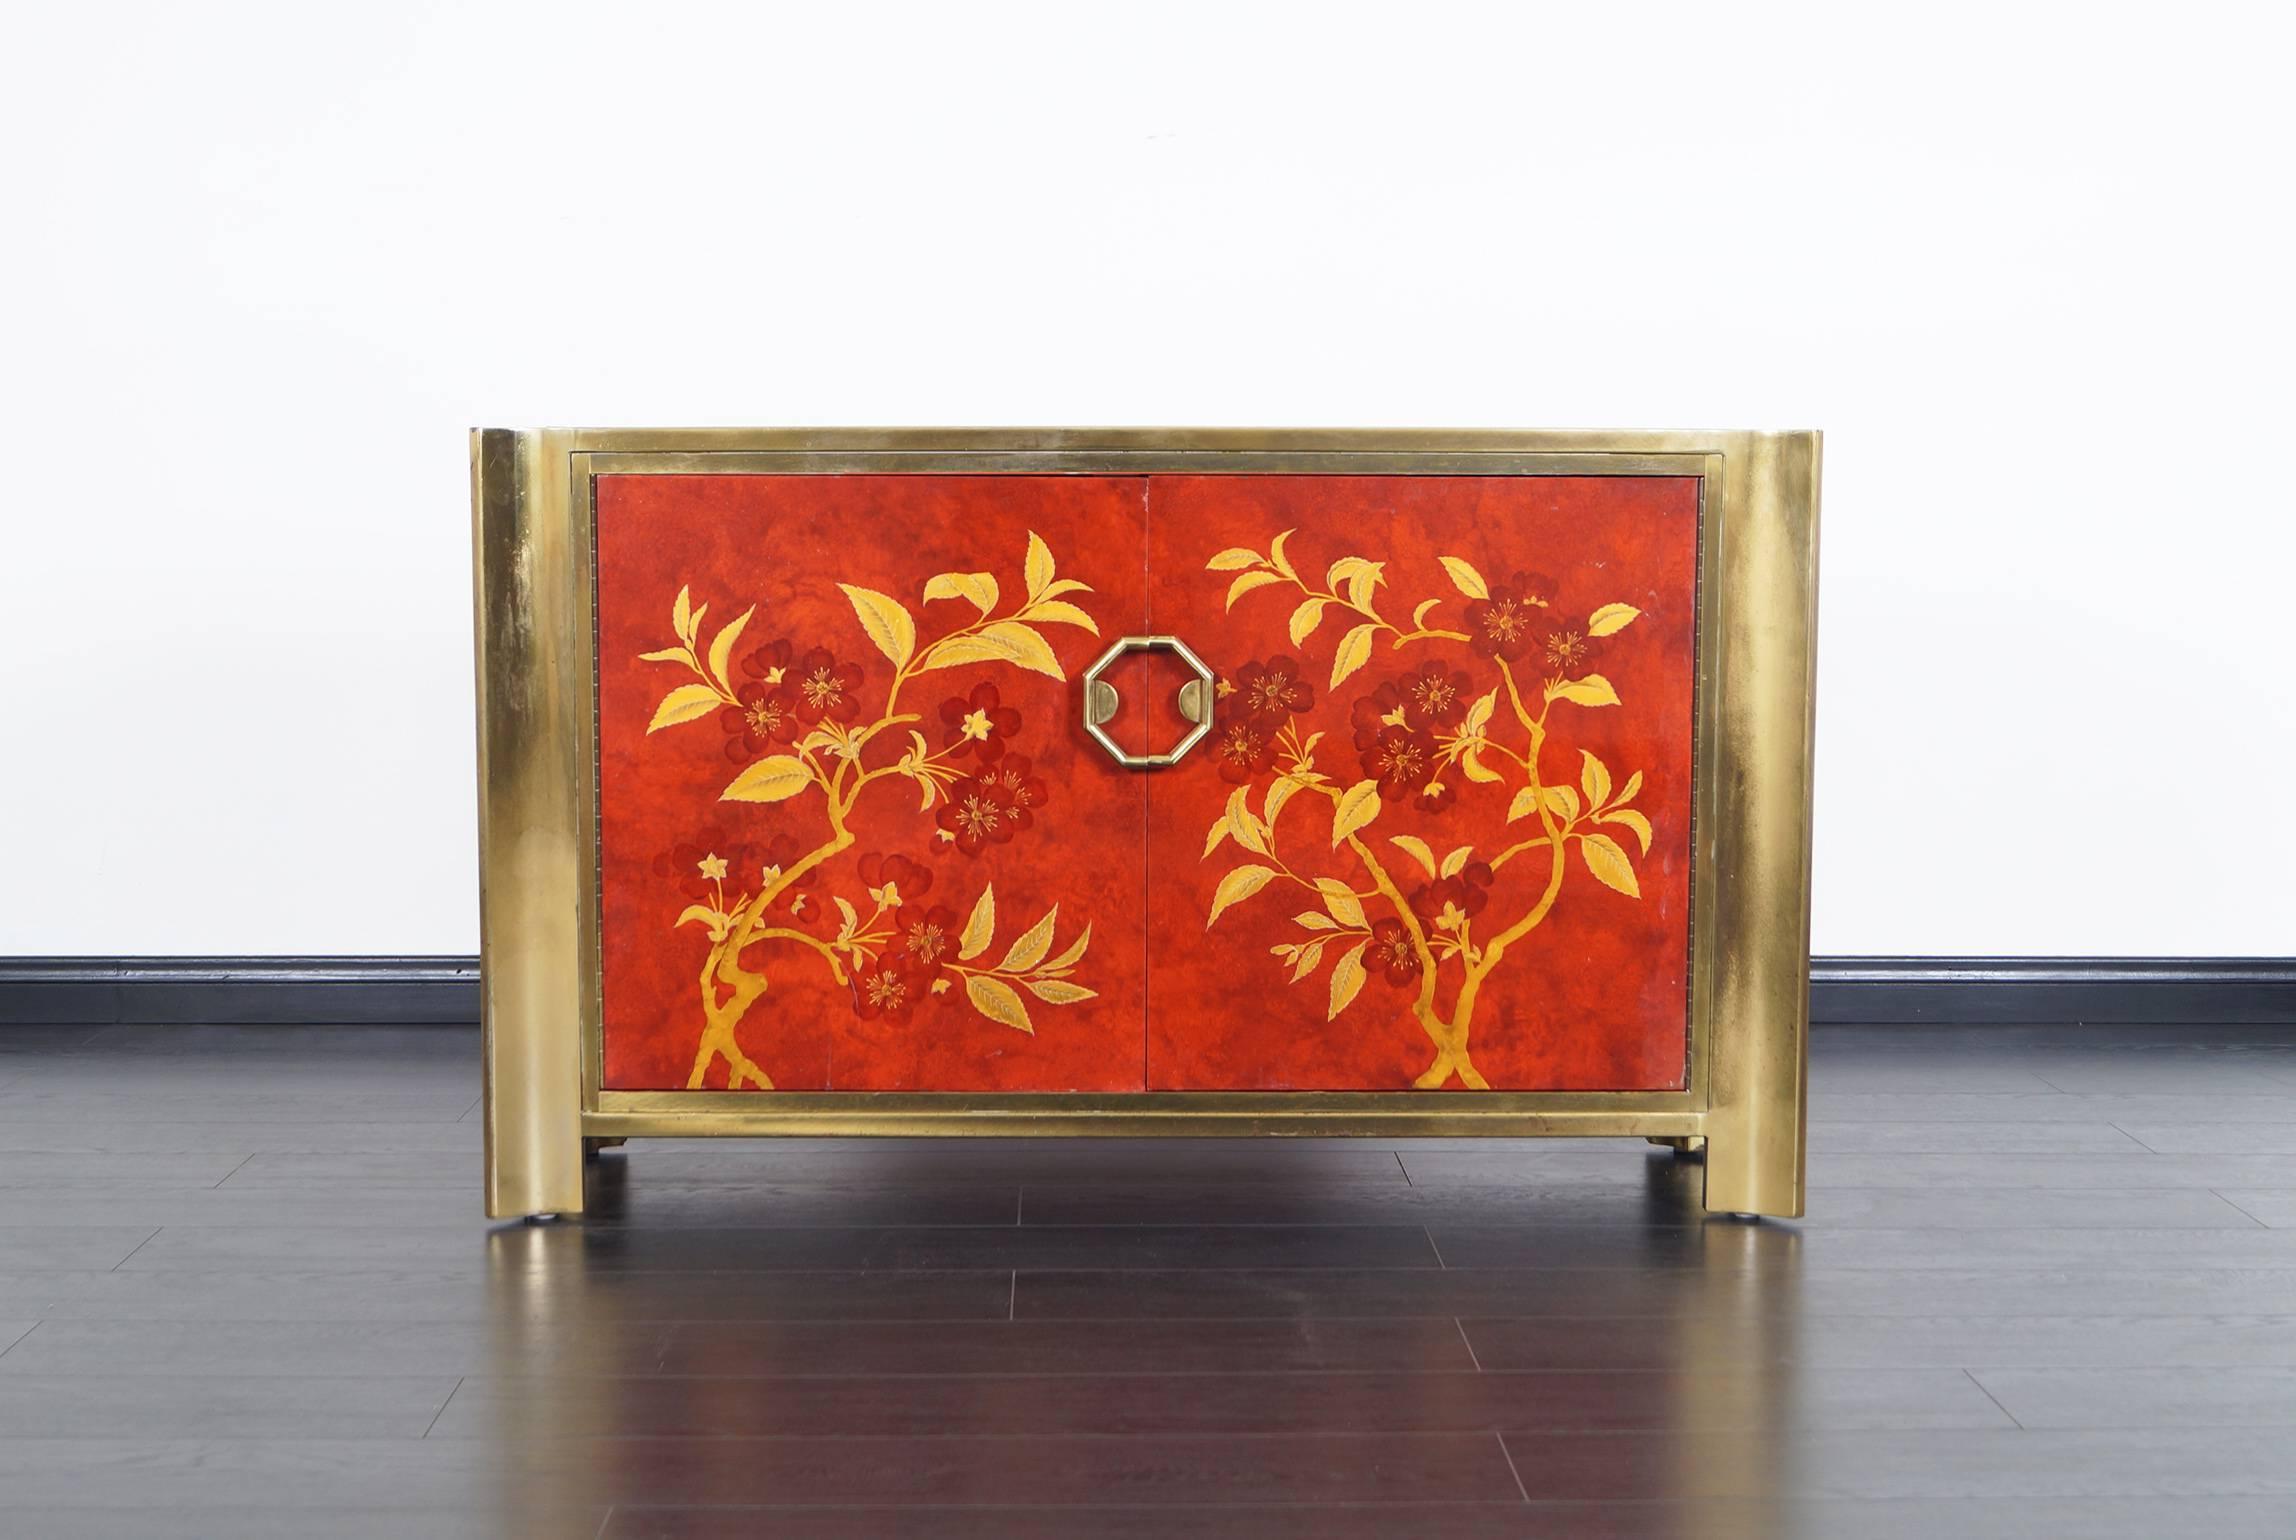 Extremely rare red lacquered and brass credenza designed by Mastercraft. An exceptional piece in original vintage finish. It's just stunning from every angle.